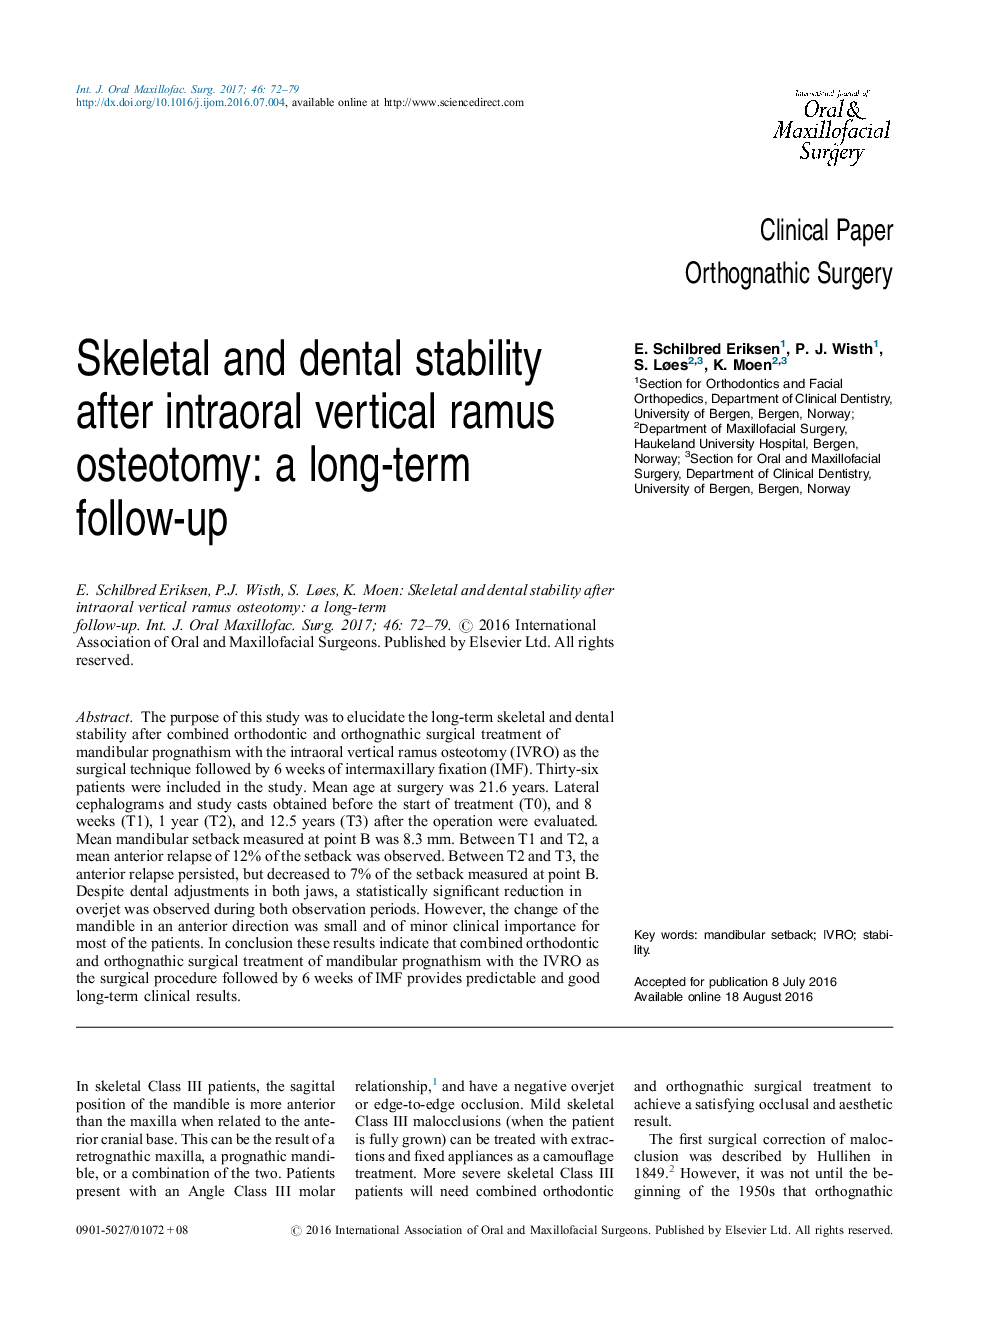 Skeletal and dental stability after intraoral vertical ramus osteotomy: a long-term follow-up